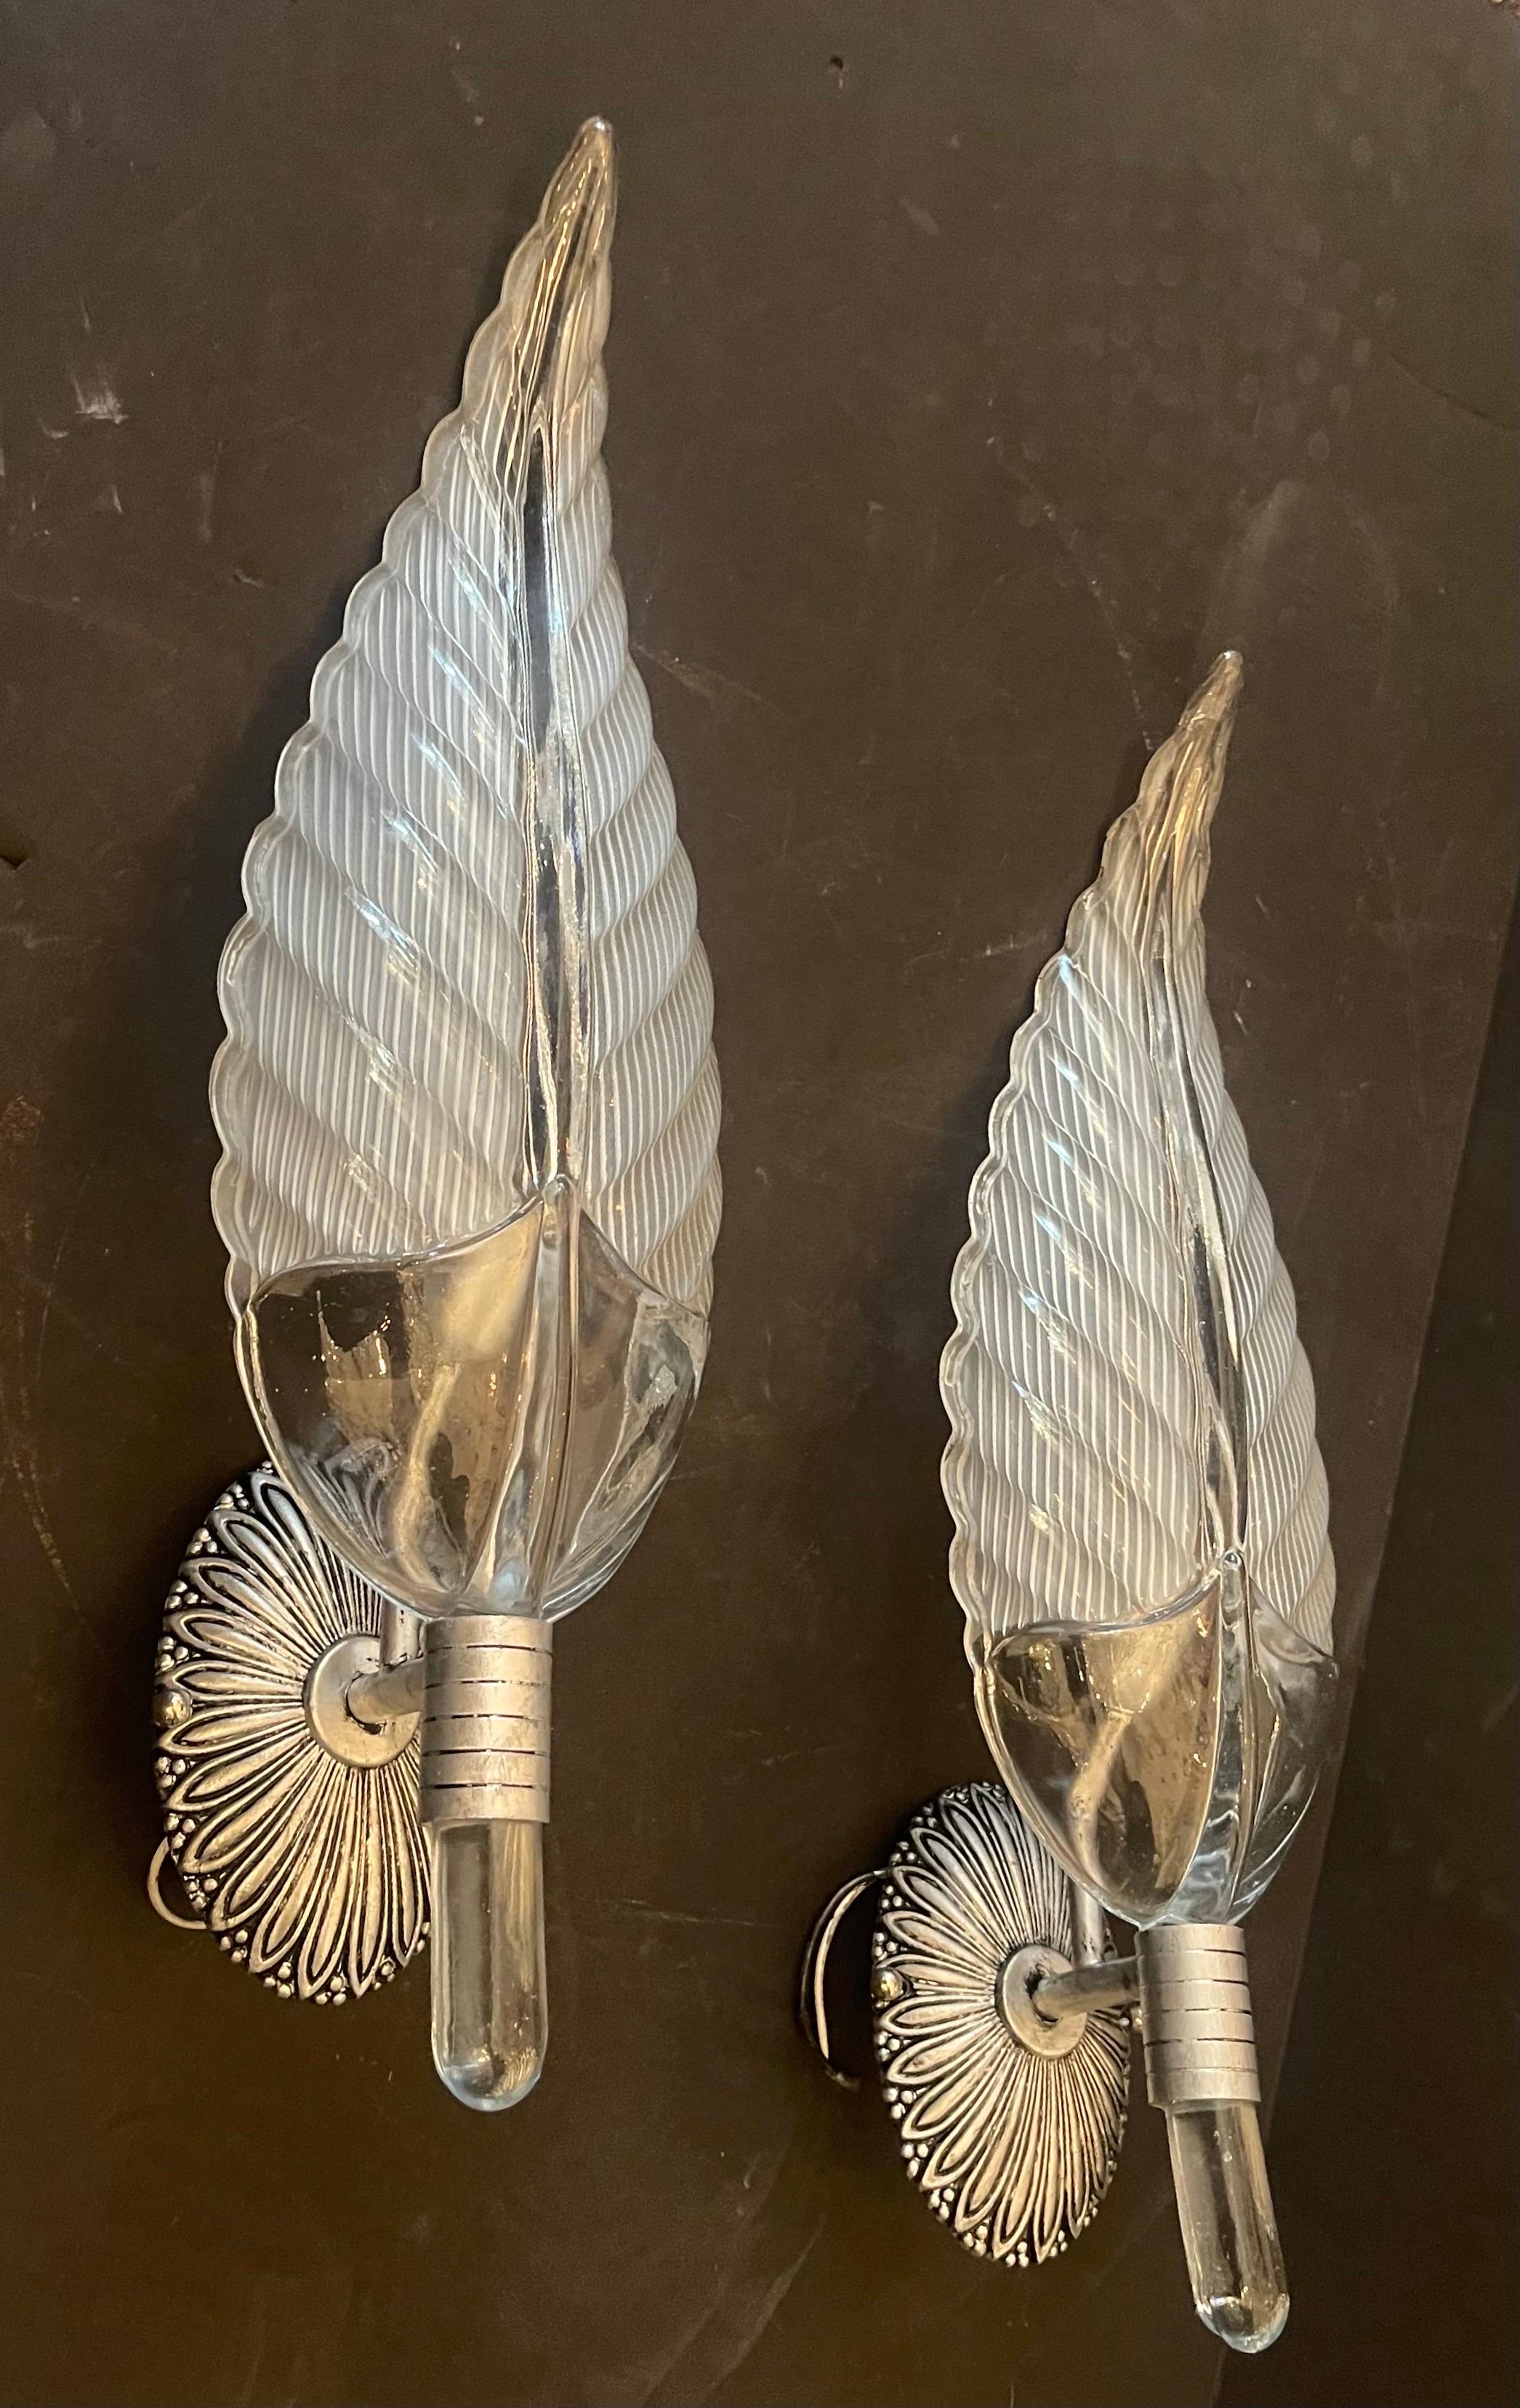 A Wonderful Set Of 4 Mid Century Modern Murano Sconces In The Manner Of  Barovier & Toso. With A Stunning Glass Shade In The Form Of A Large Leaf Shape And Having An Oval Nickel Plated Back Plate Leading To A Single Candelabra Socket. 

2 Pairs